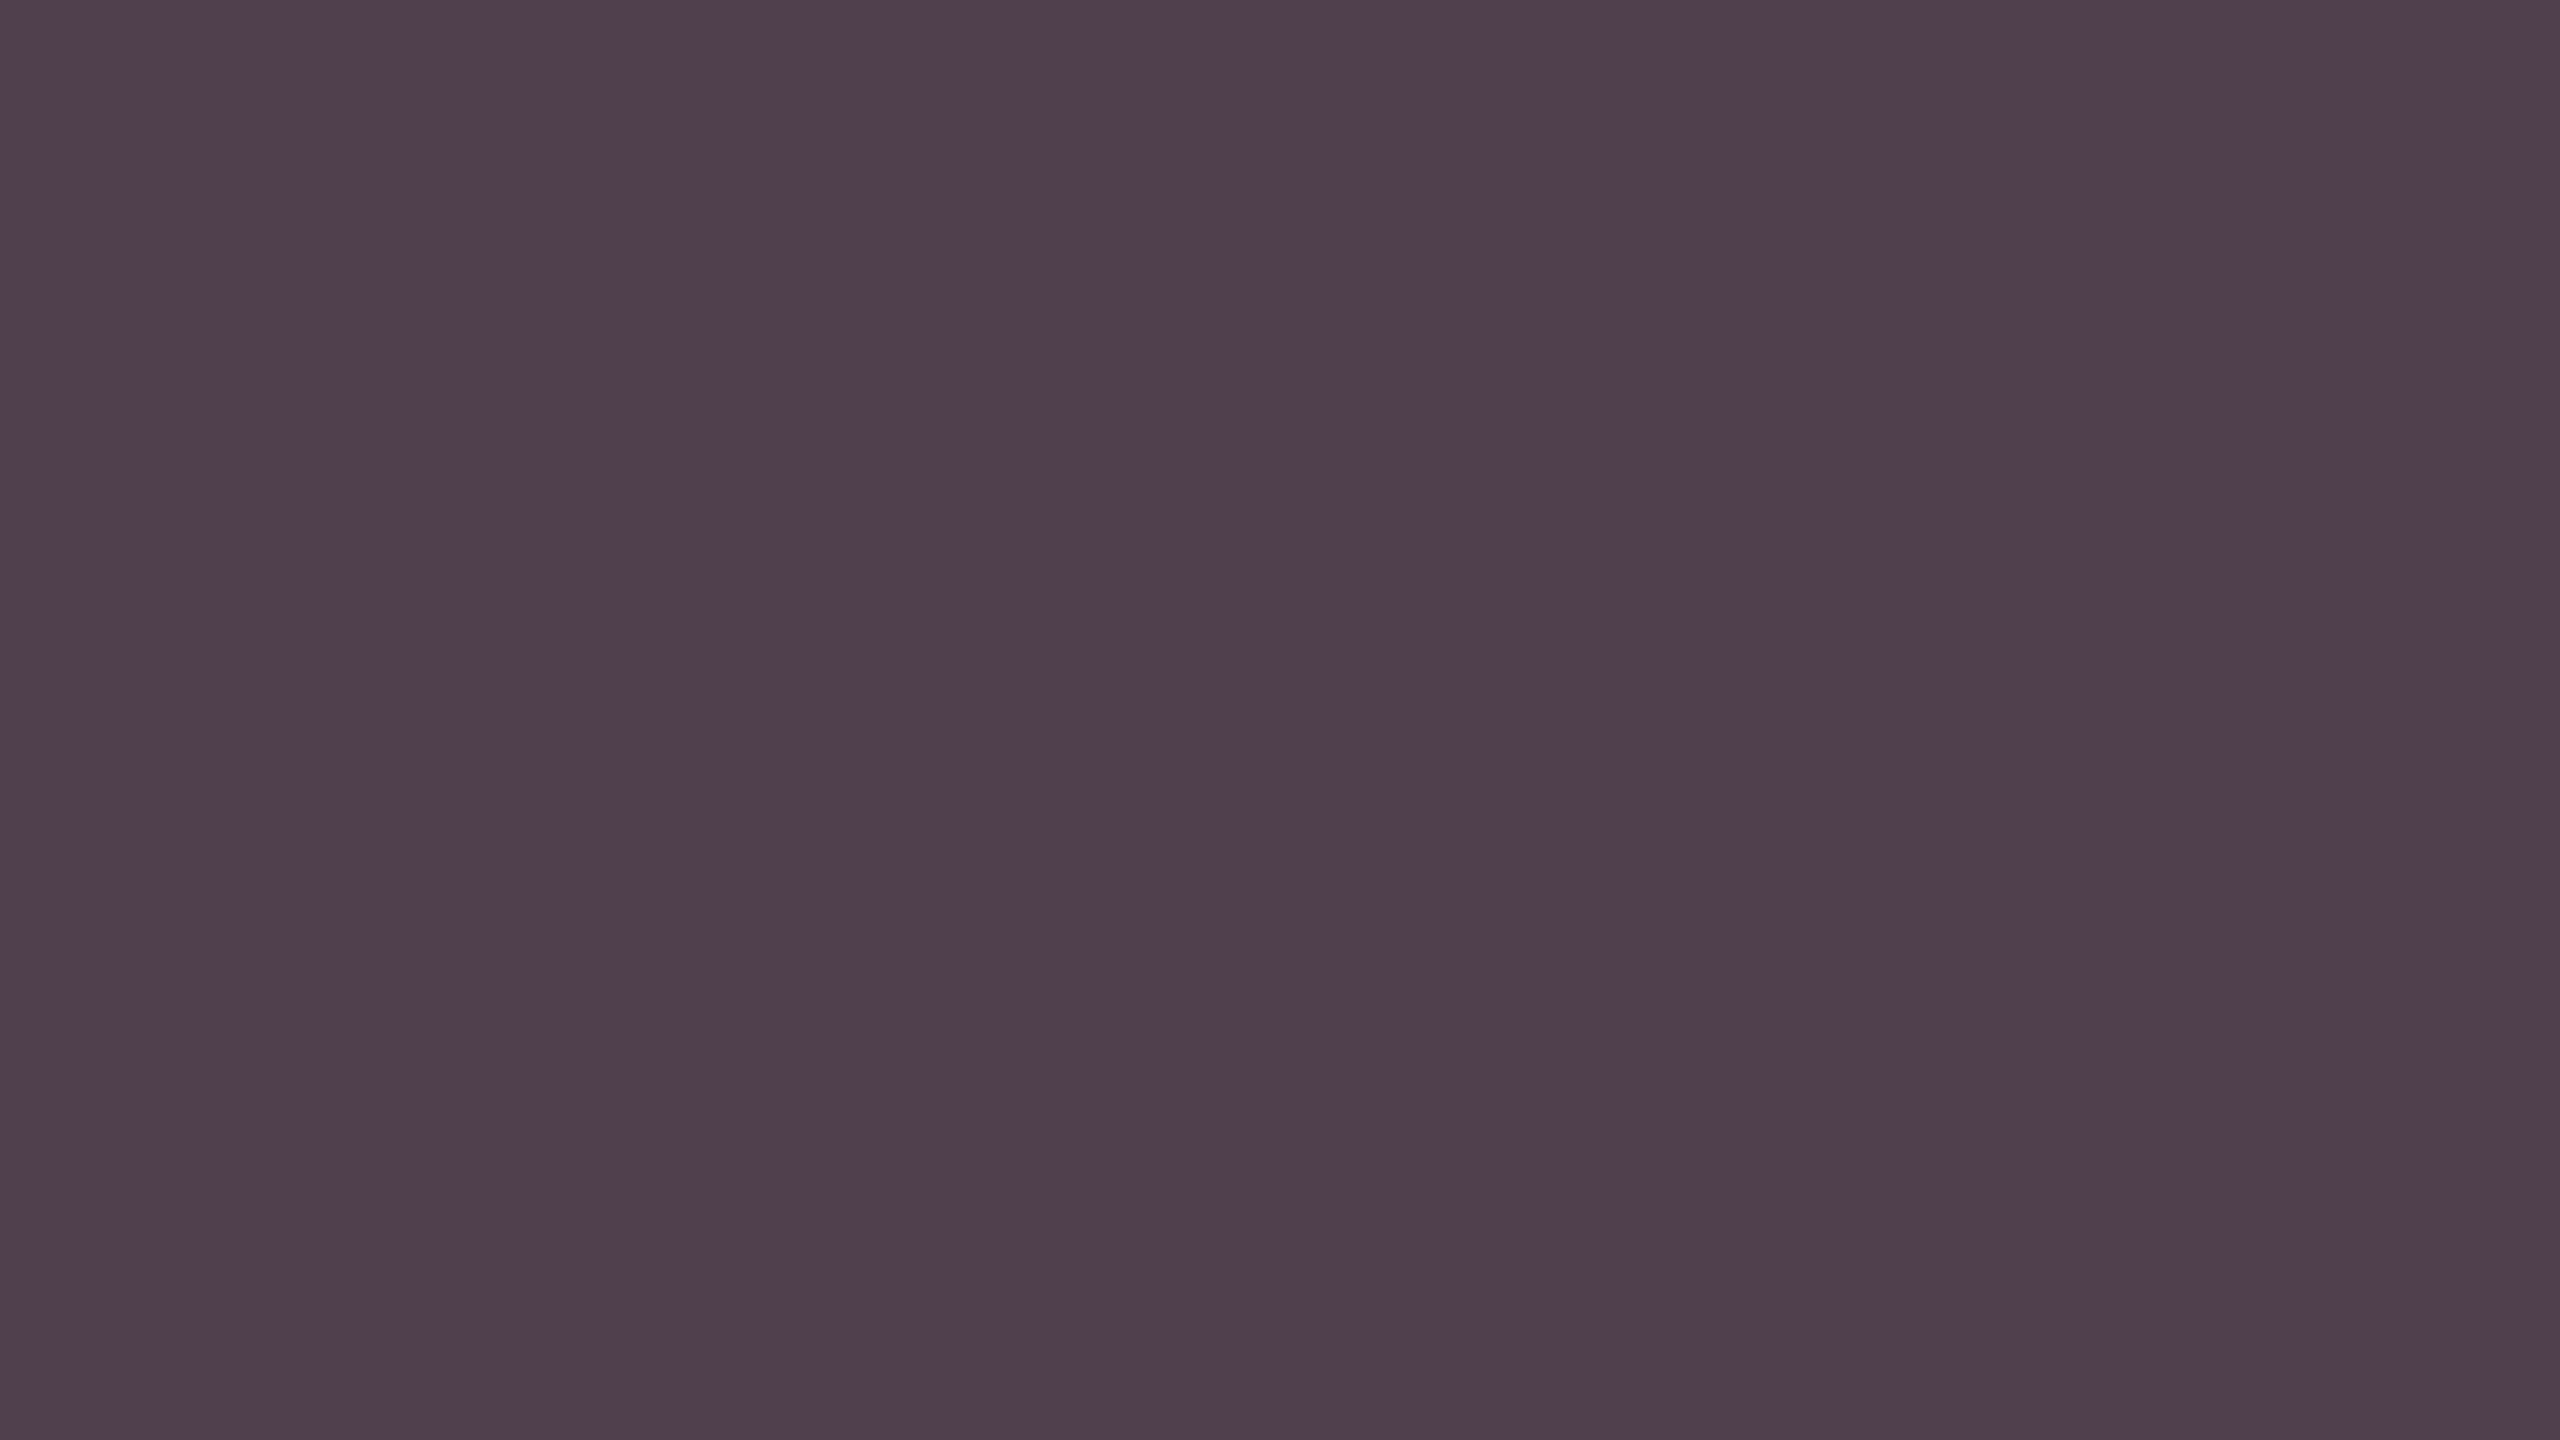 2560x1440 Purple Taupe Solid Color Background